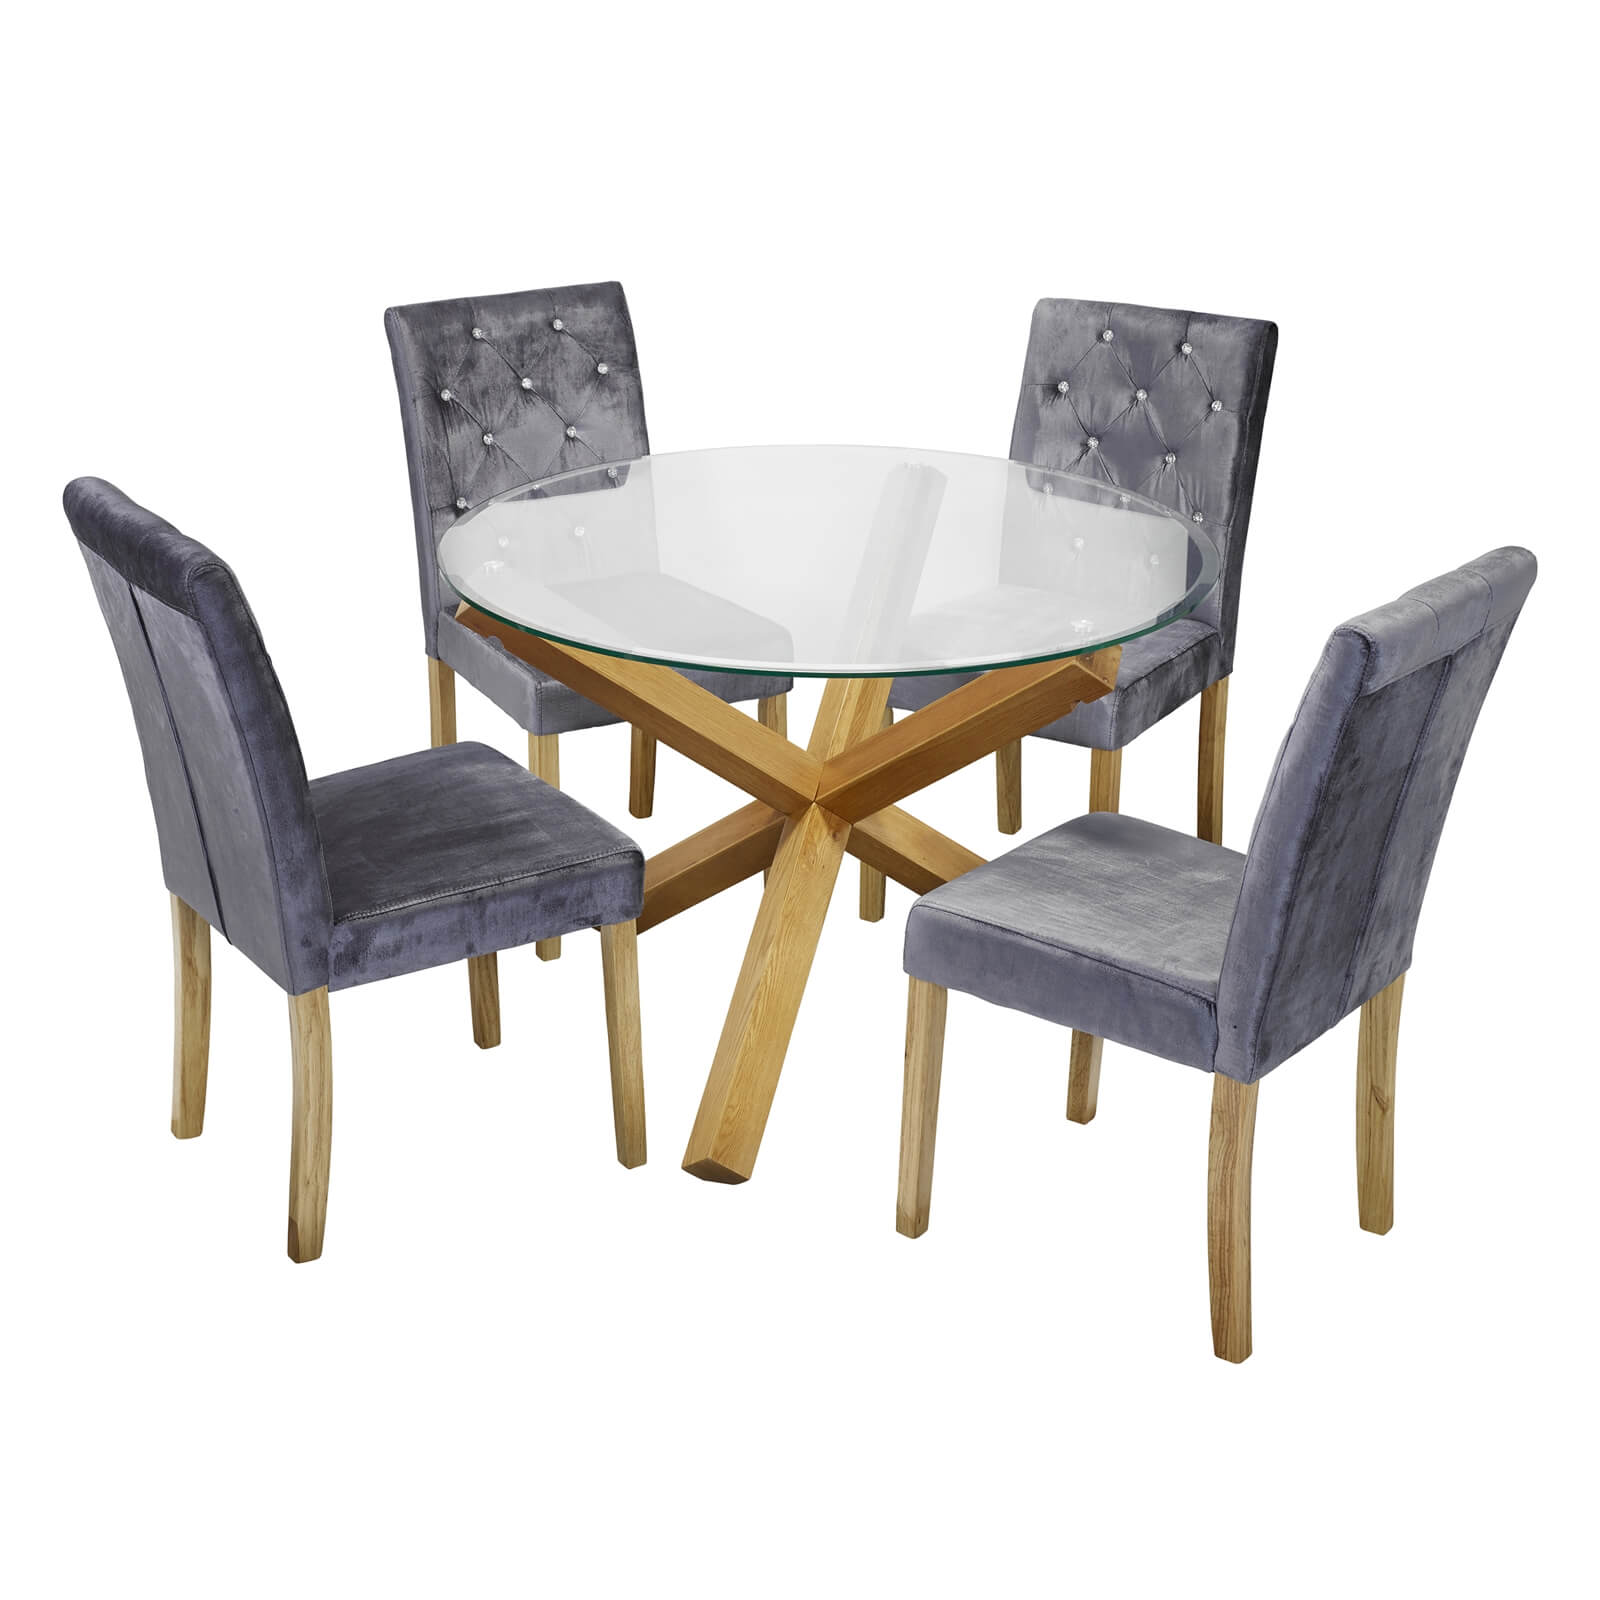 Oporto 4 Seater Dining Set - Paris Dining Chairs - Silver